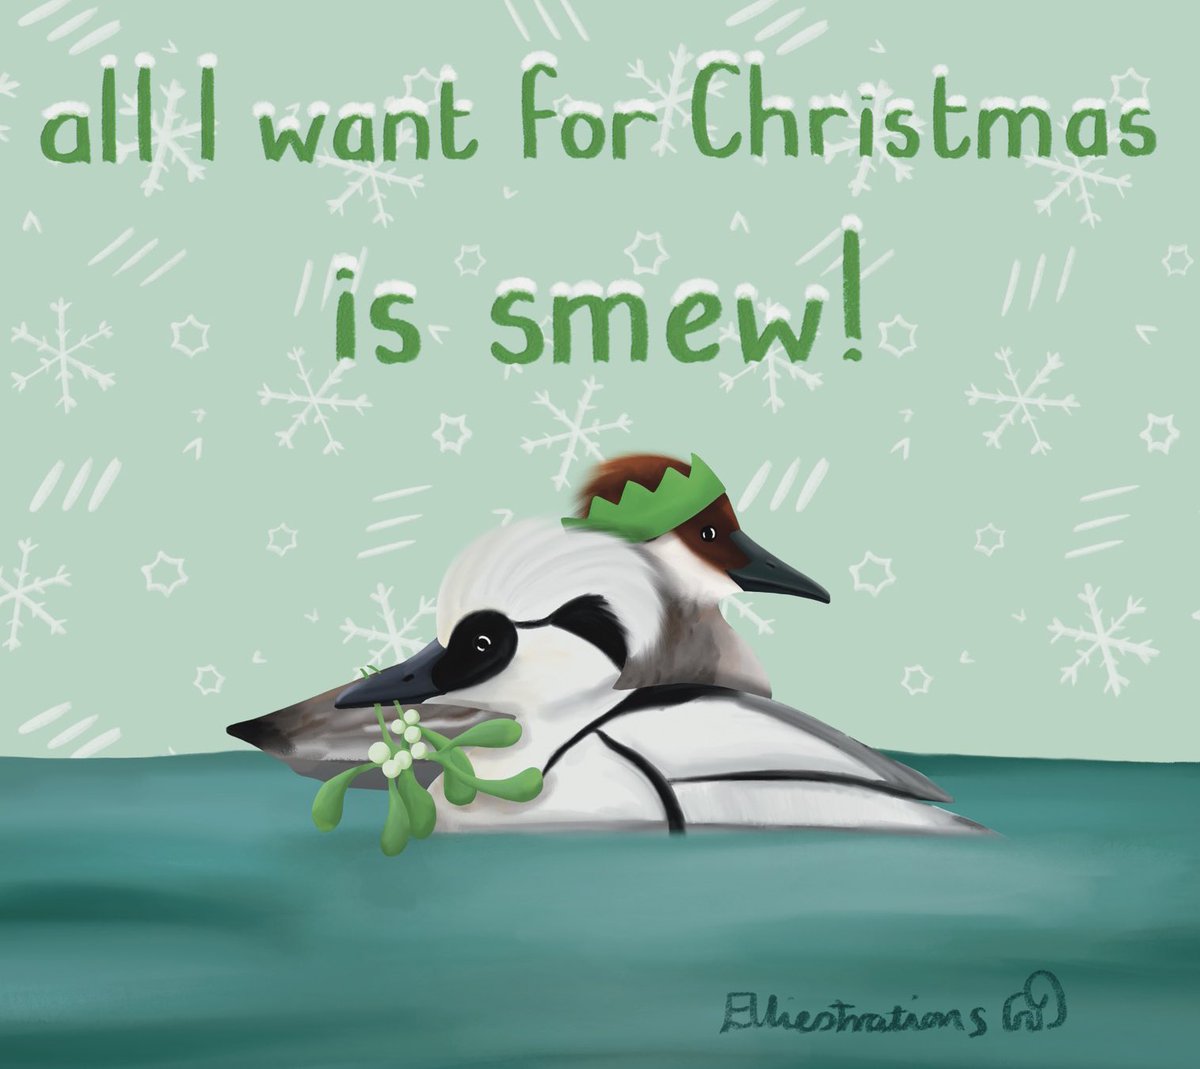 Was very happy to finally see the drake smew at @RSPBLochwinnoch - Christmas wish ticked off on my third try! I had done a smew Christmas illustration this year, making it all the more satisfying to see them in real life! #bird #smew #getbirding